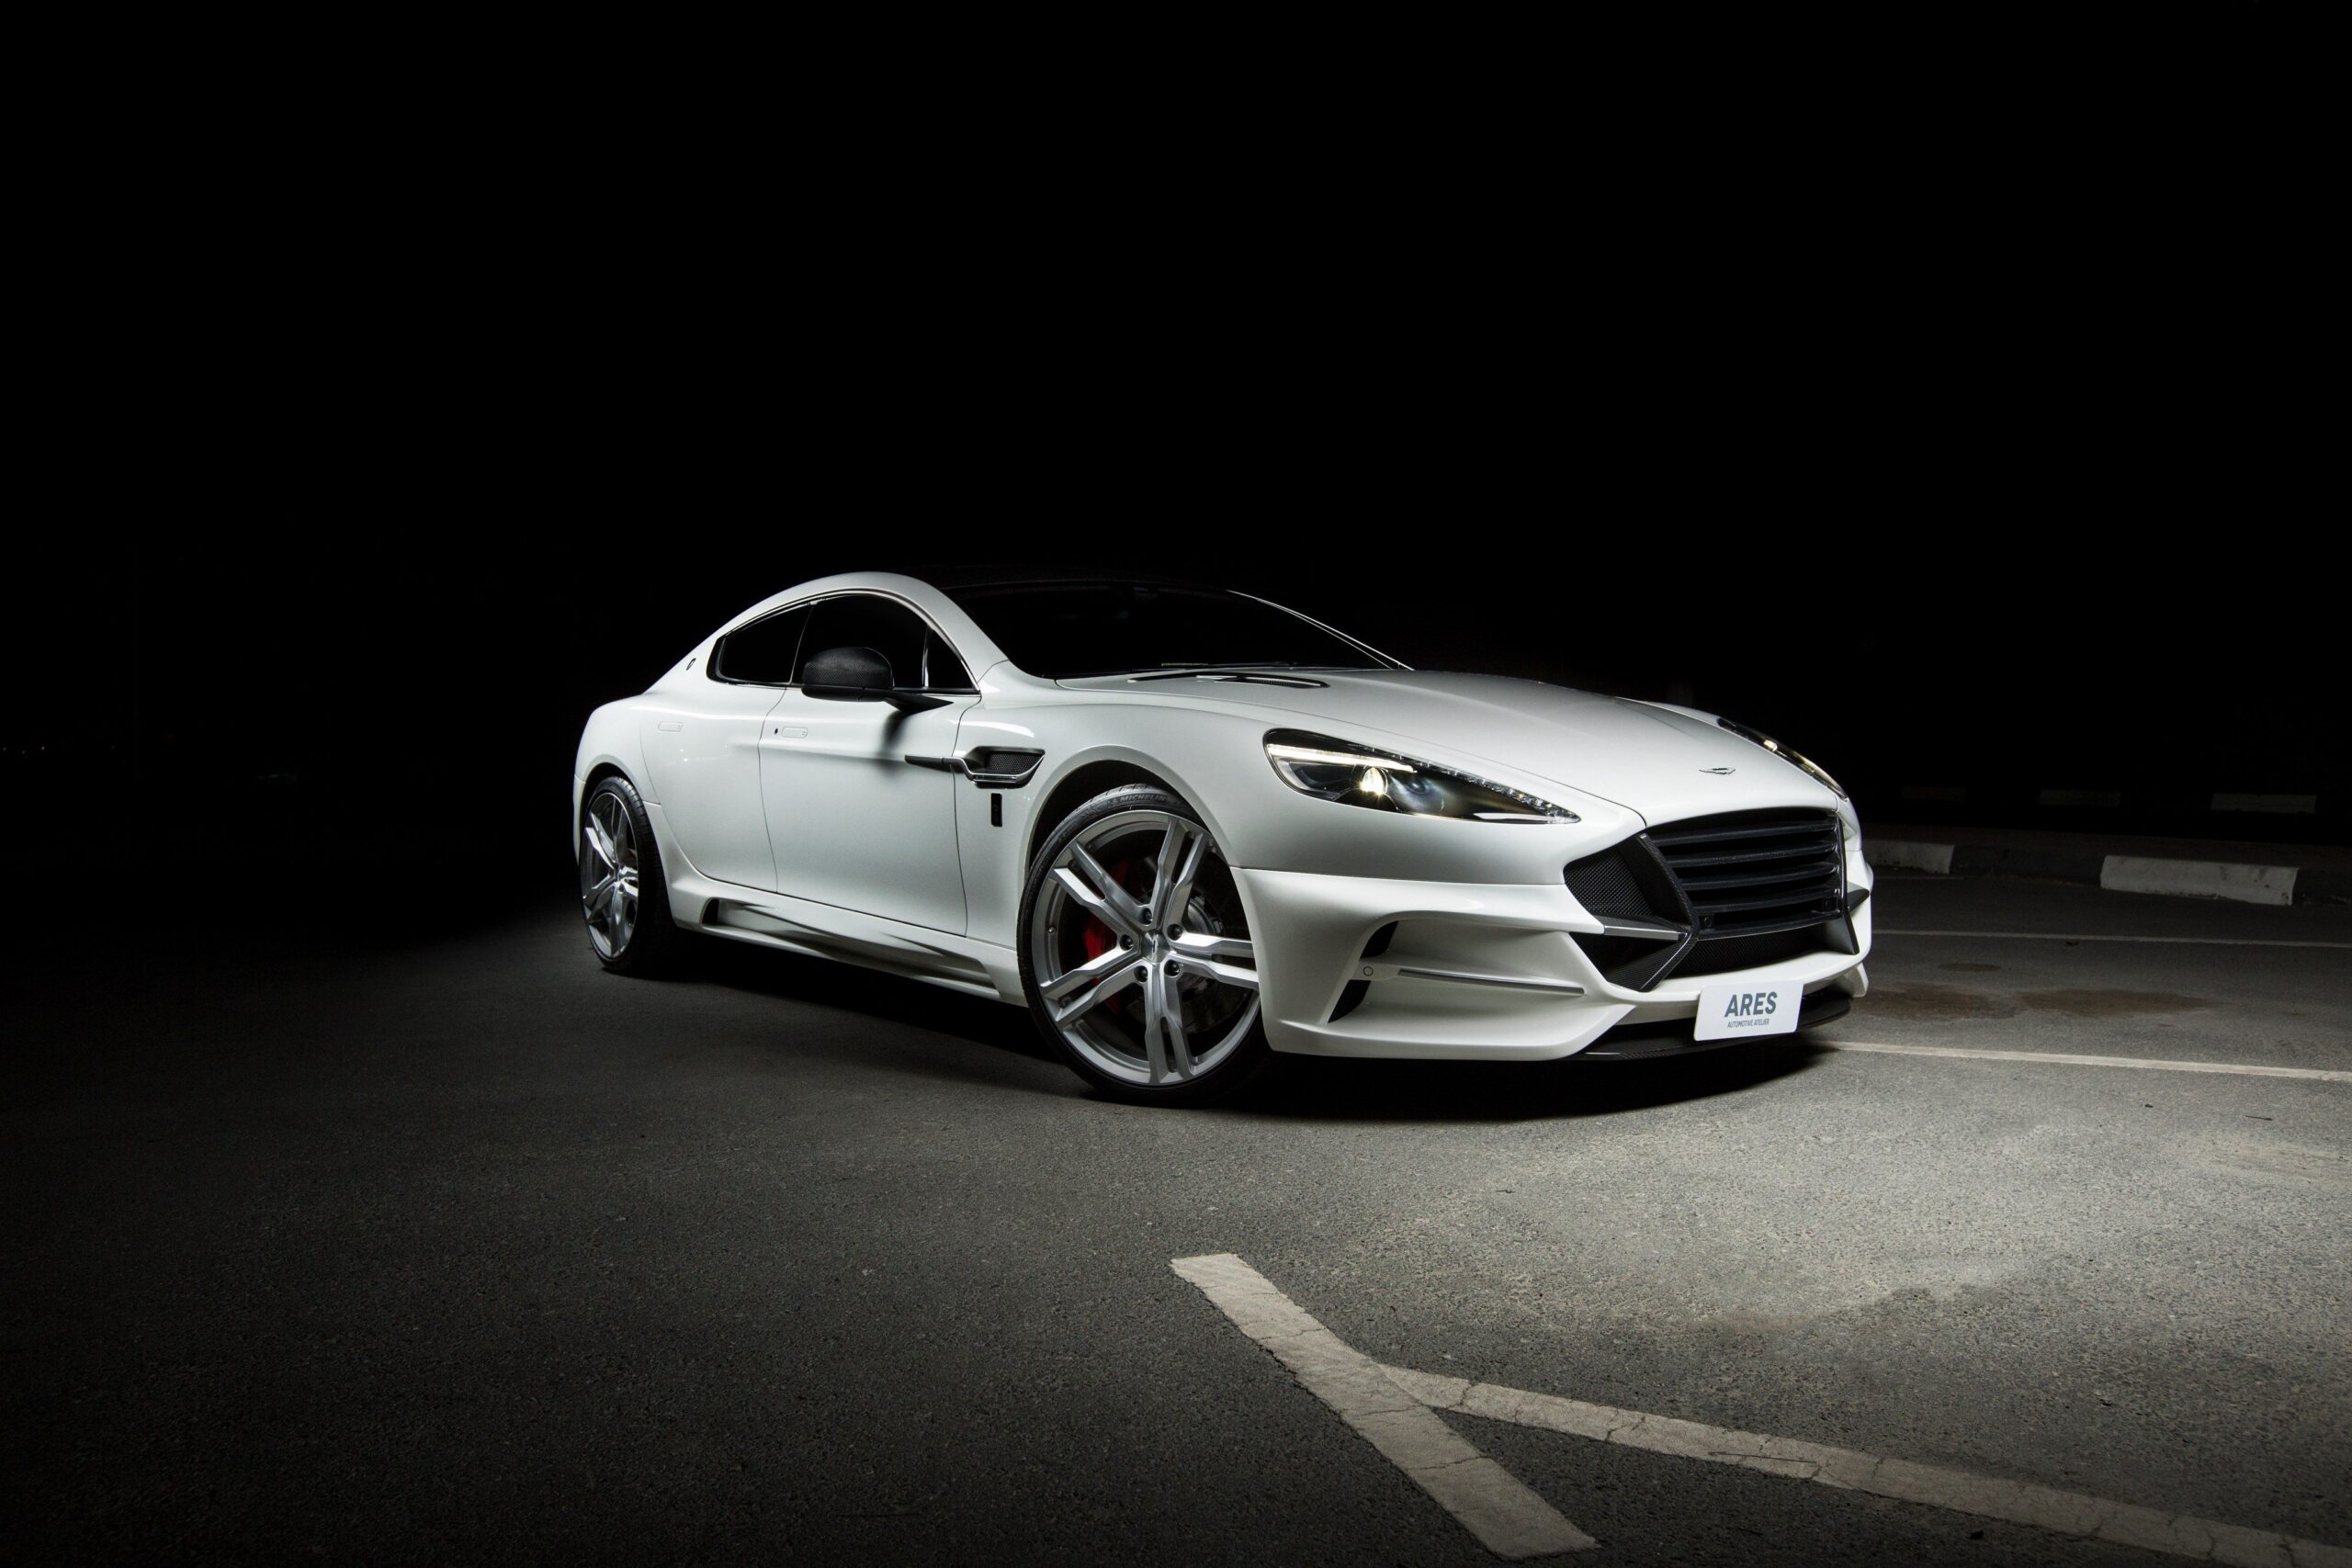 Free wallpapers and screensavers for aston martin rapide